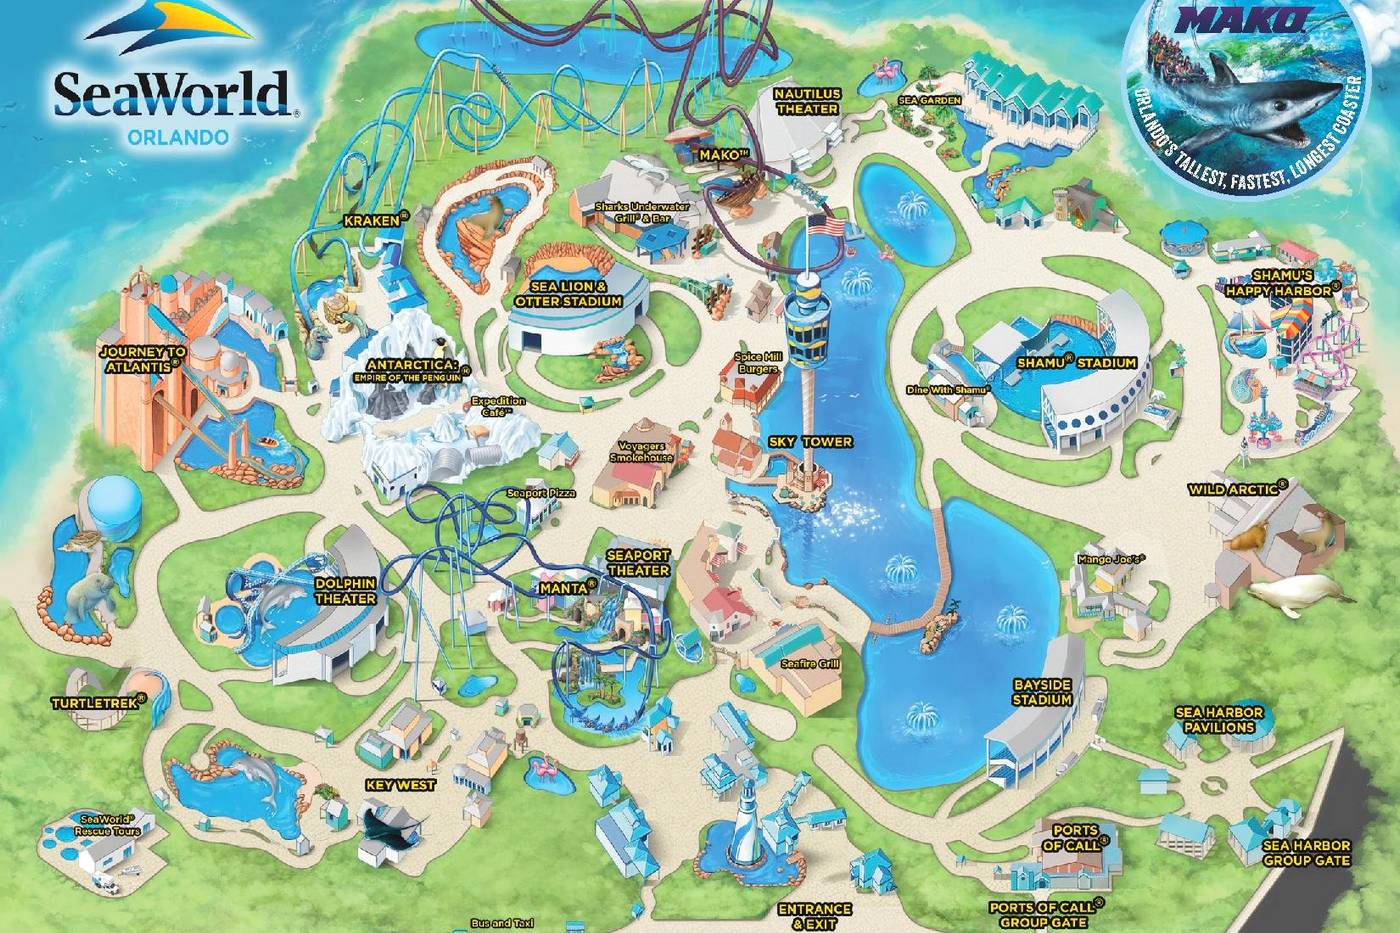 Photo map of attractions in the Seaworld park in Florida